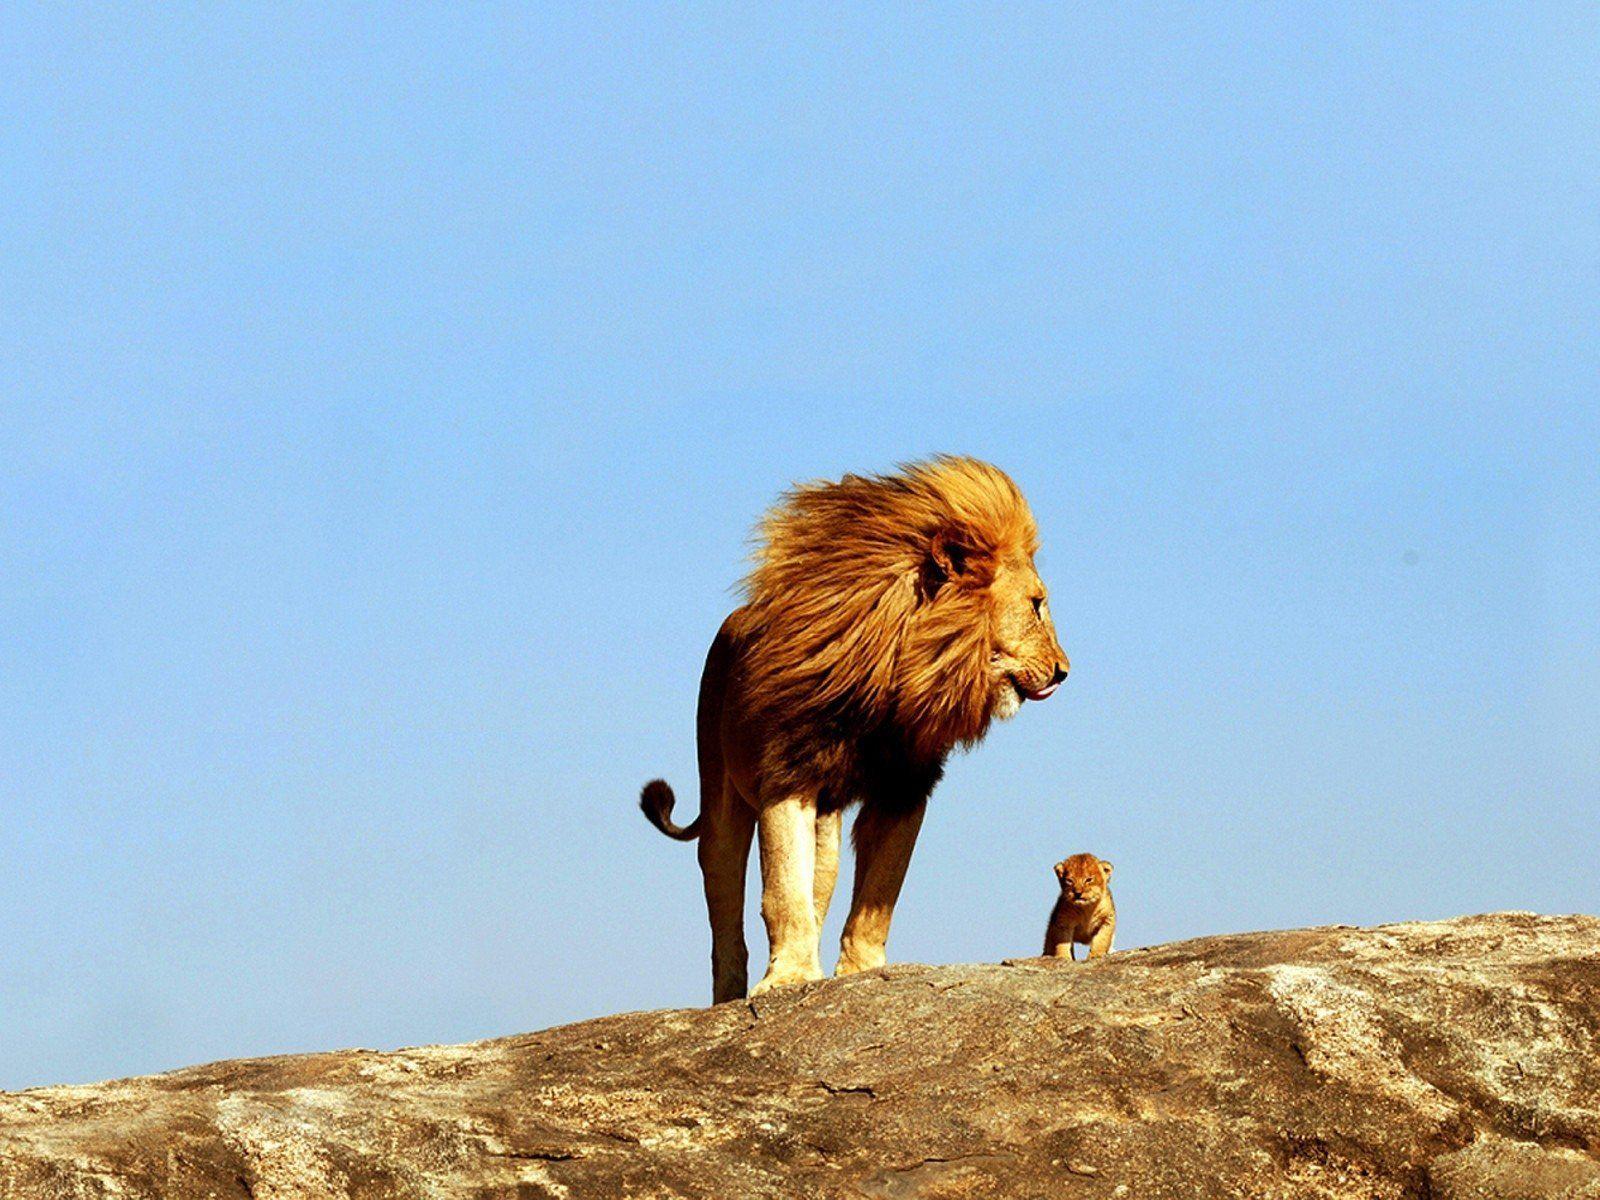 Dad lion and the lion cub wallpaper, Lions on the rock wallpaper